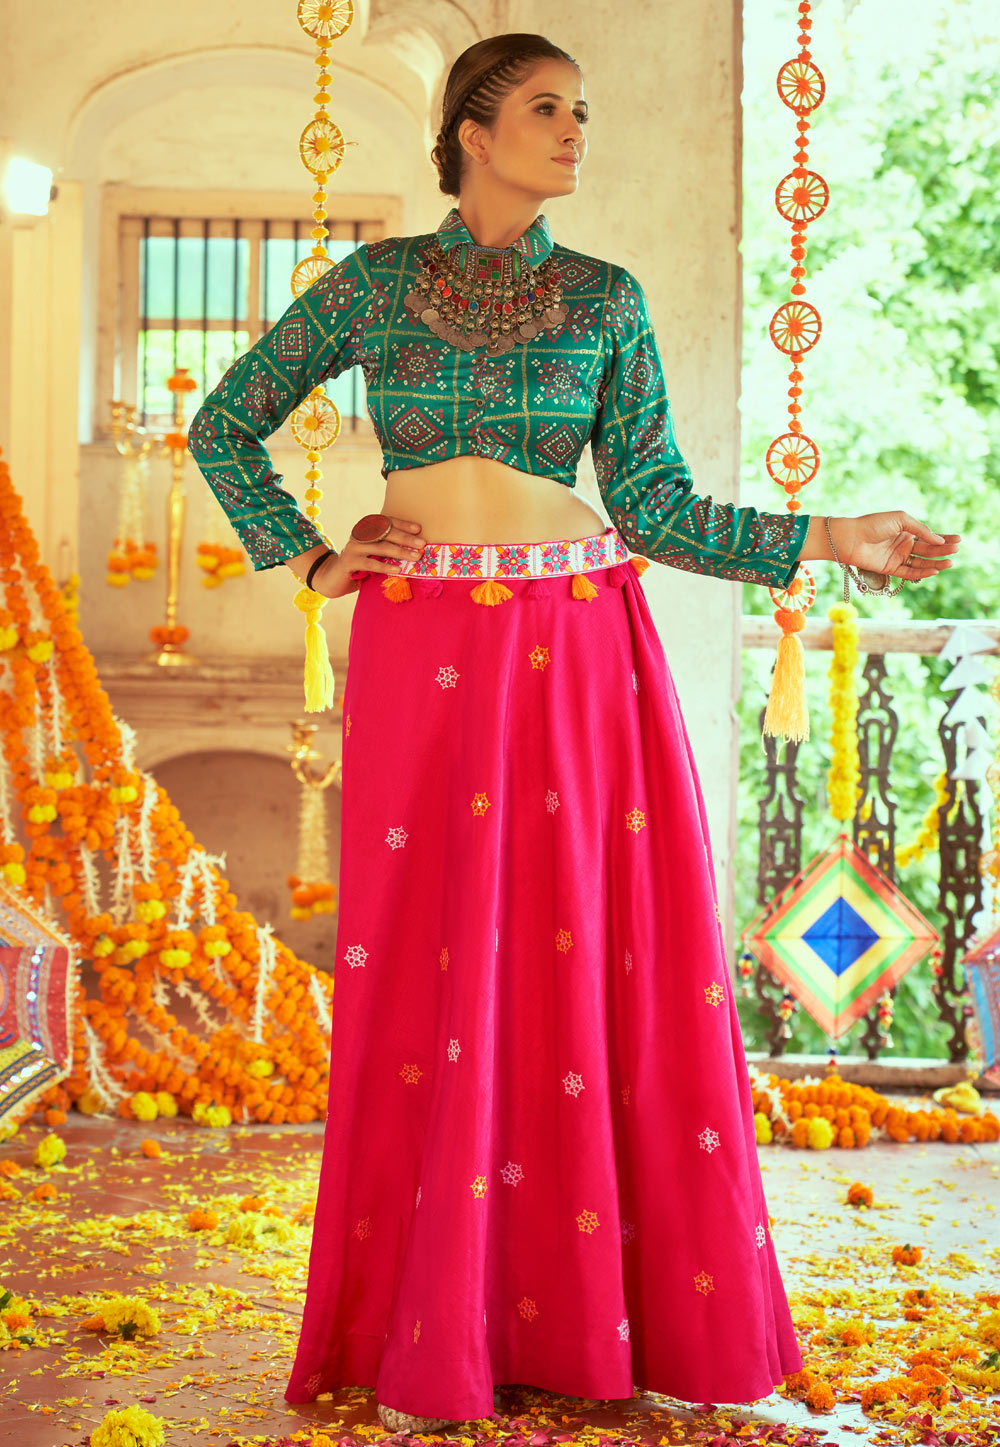 20+ Crop Top Lehenga Designs You Never Knew About | Crop top lehenga,  Lehenga designs, Indian dresses